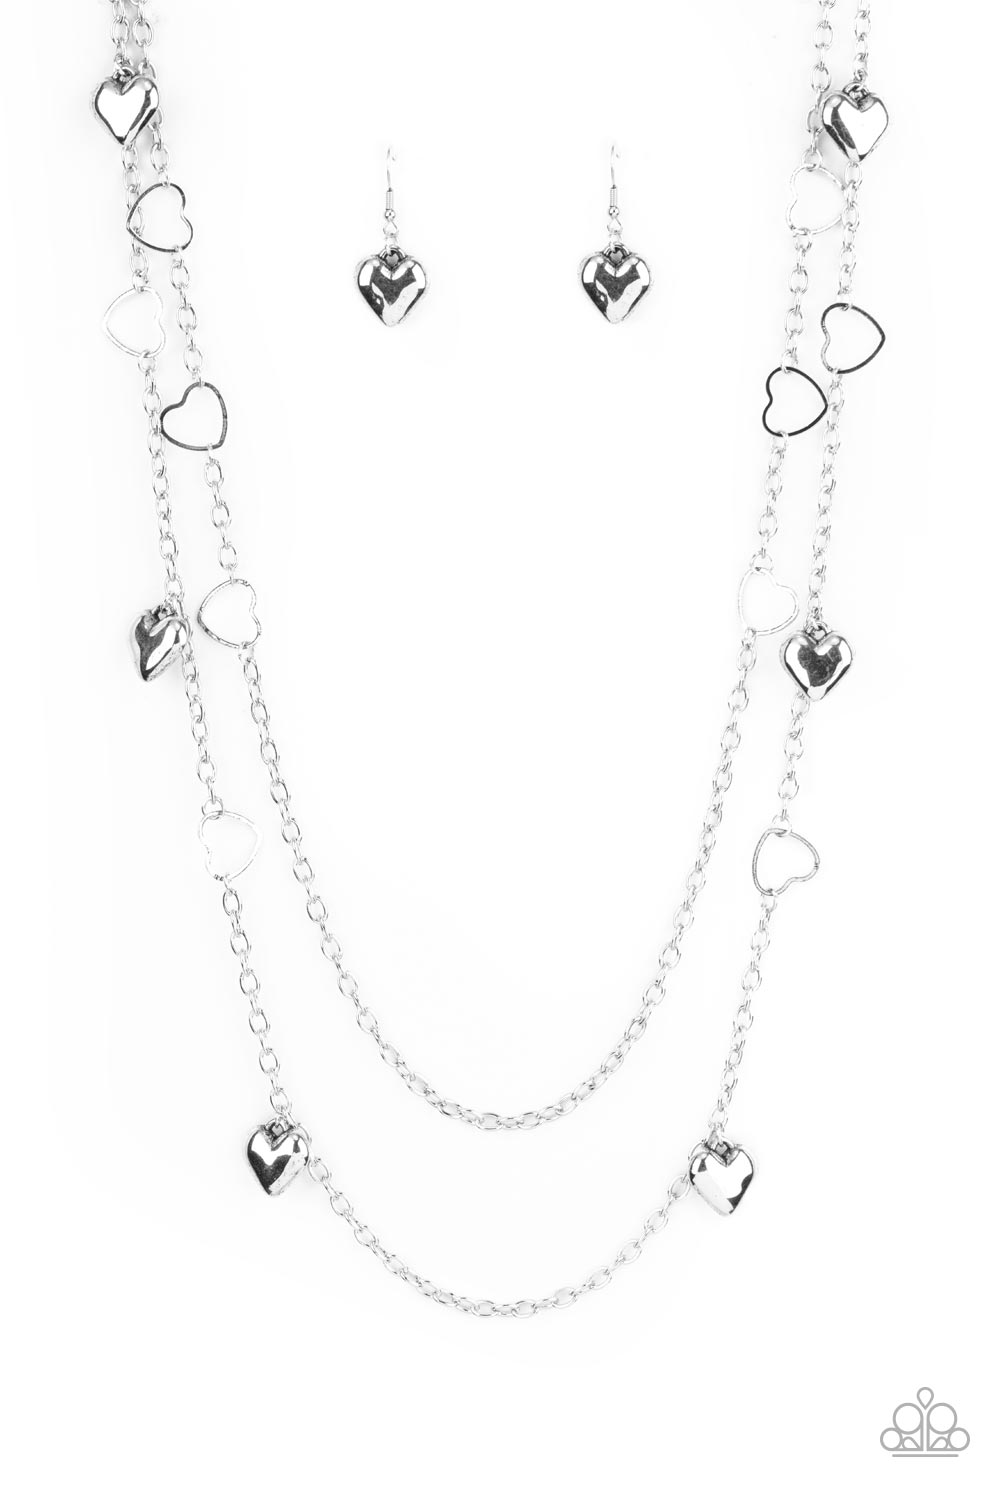 Chicly Cupid - Silver Heart Charm Necklace - Paparazzi Accessories Long Necklaces Bejeweled Accessories By Kristie Featuring Paparazzi Jewelry  - Trendy fashion jewelry for everyone -